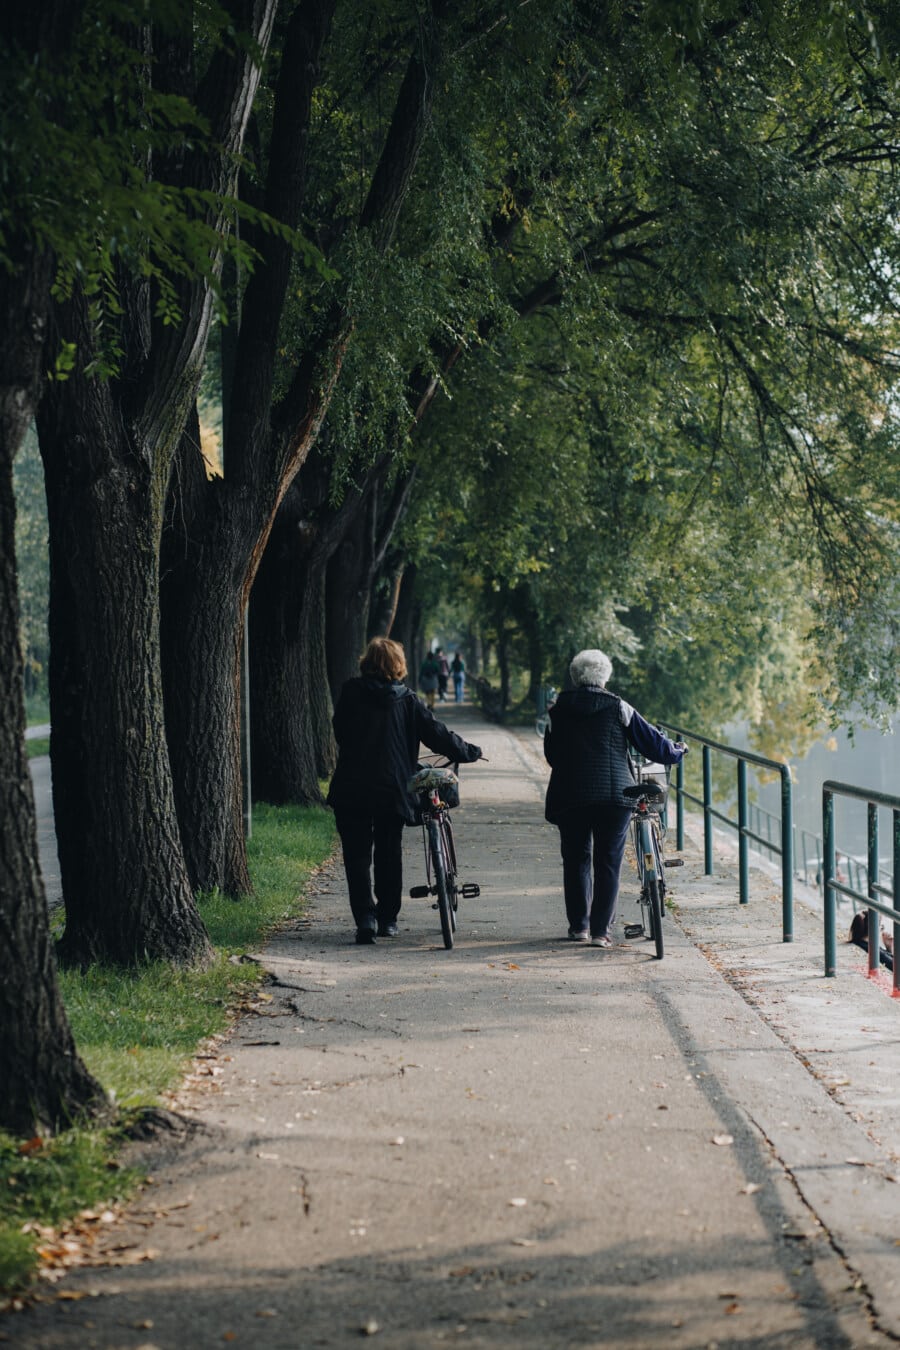 pensioner, old woman, walking, alley, recreation, bicycle, people, outdoors, road, tree